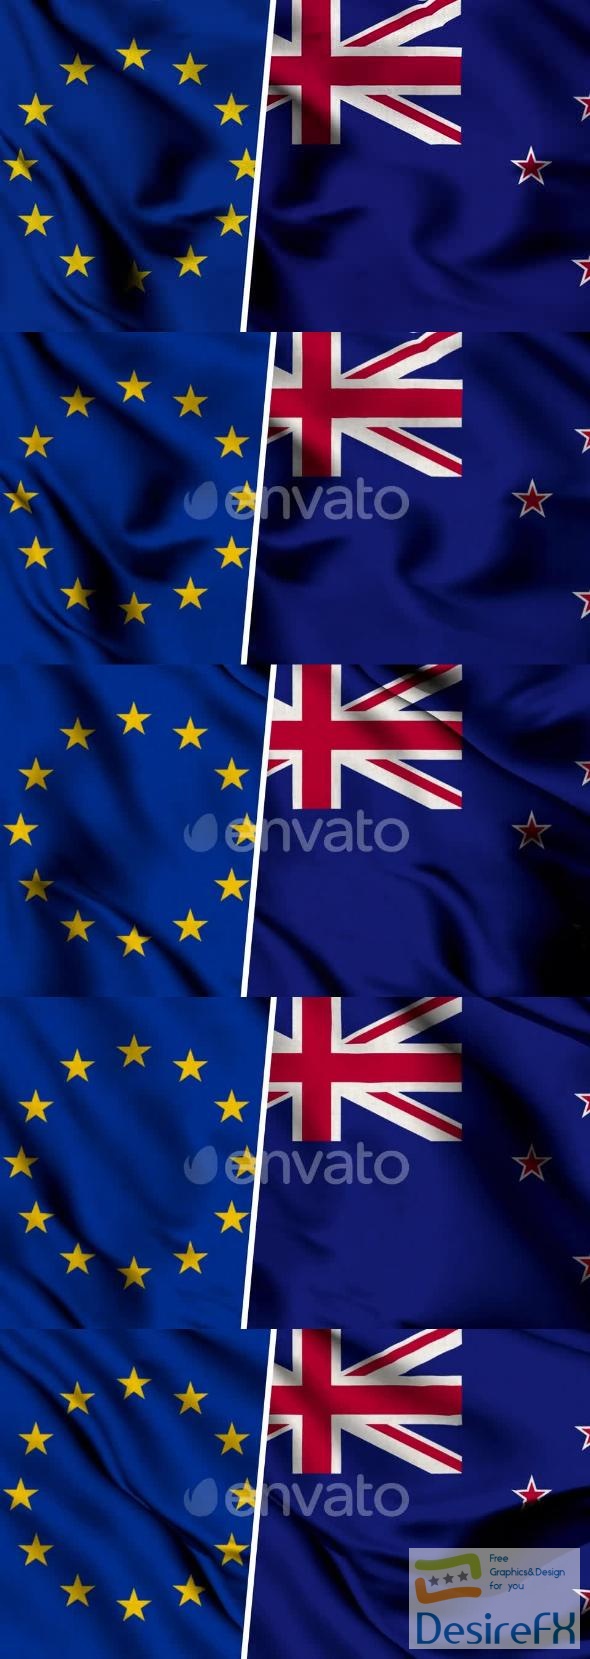 VideoHive New Zealand Flag And European Union 47577786